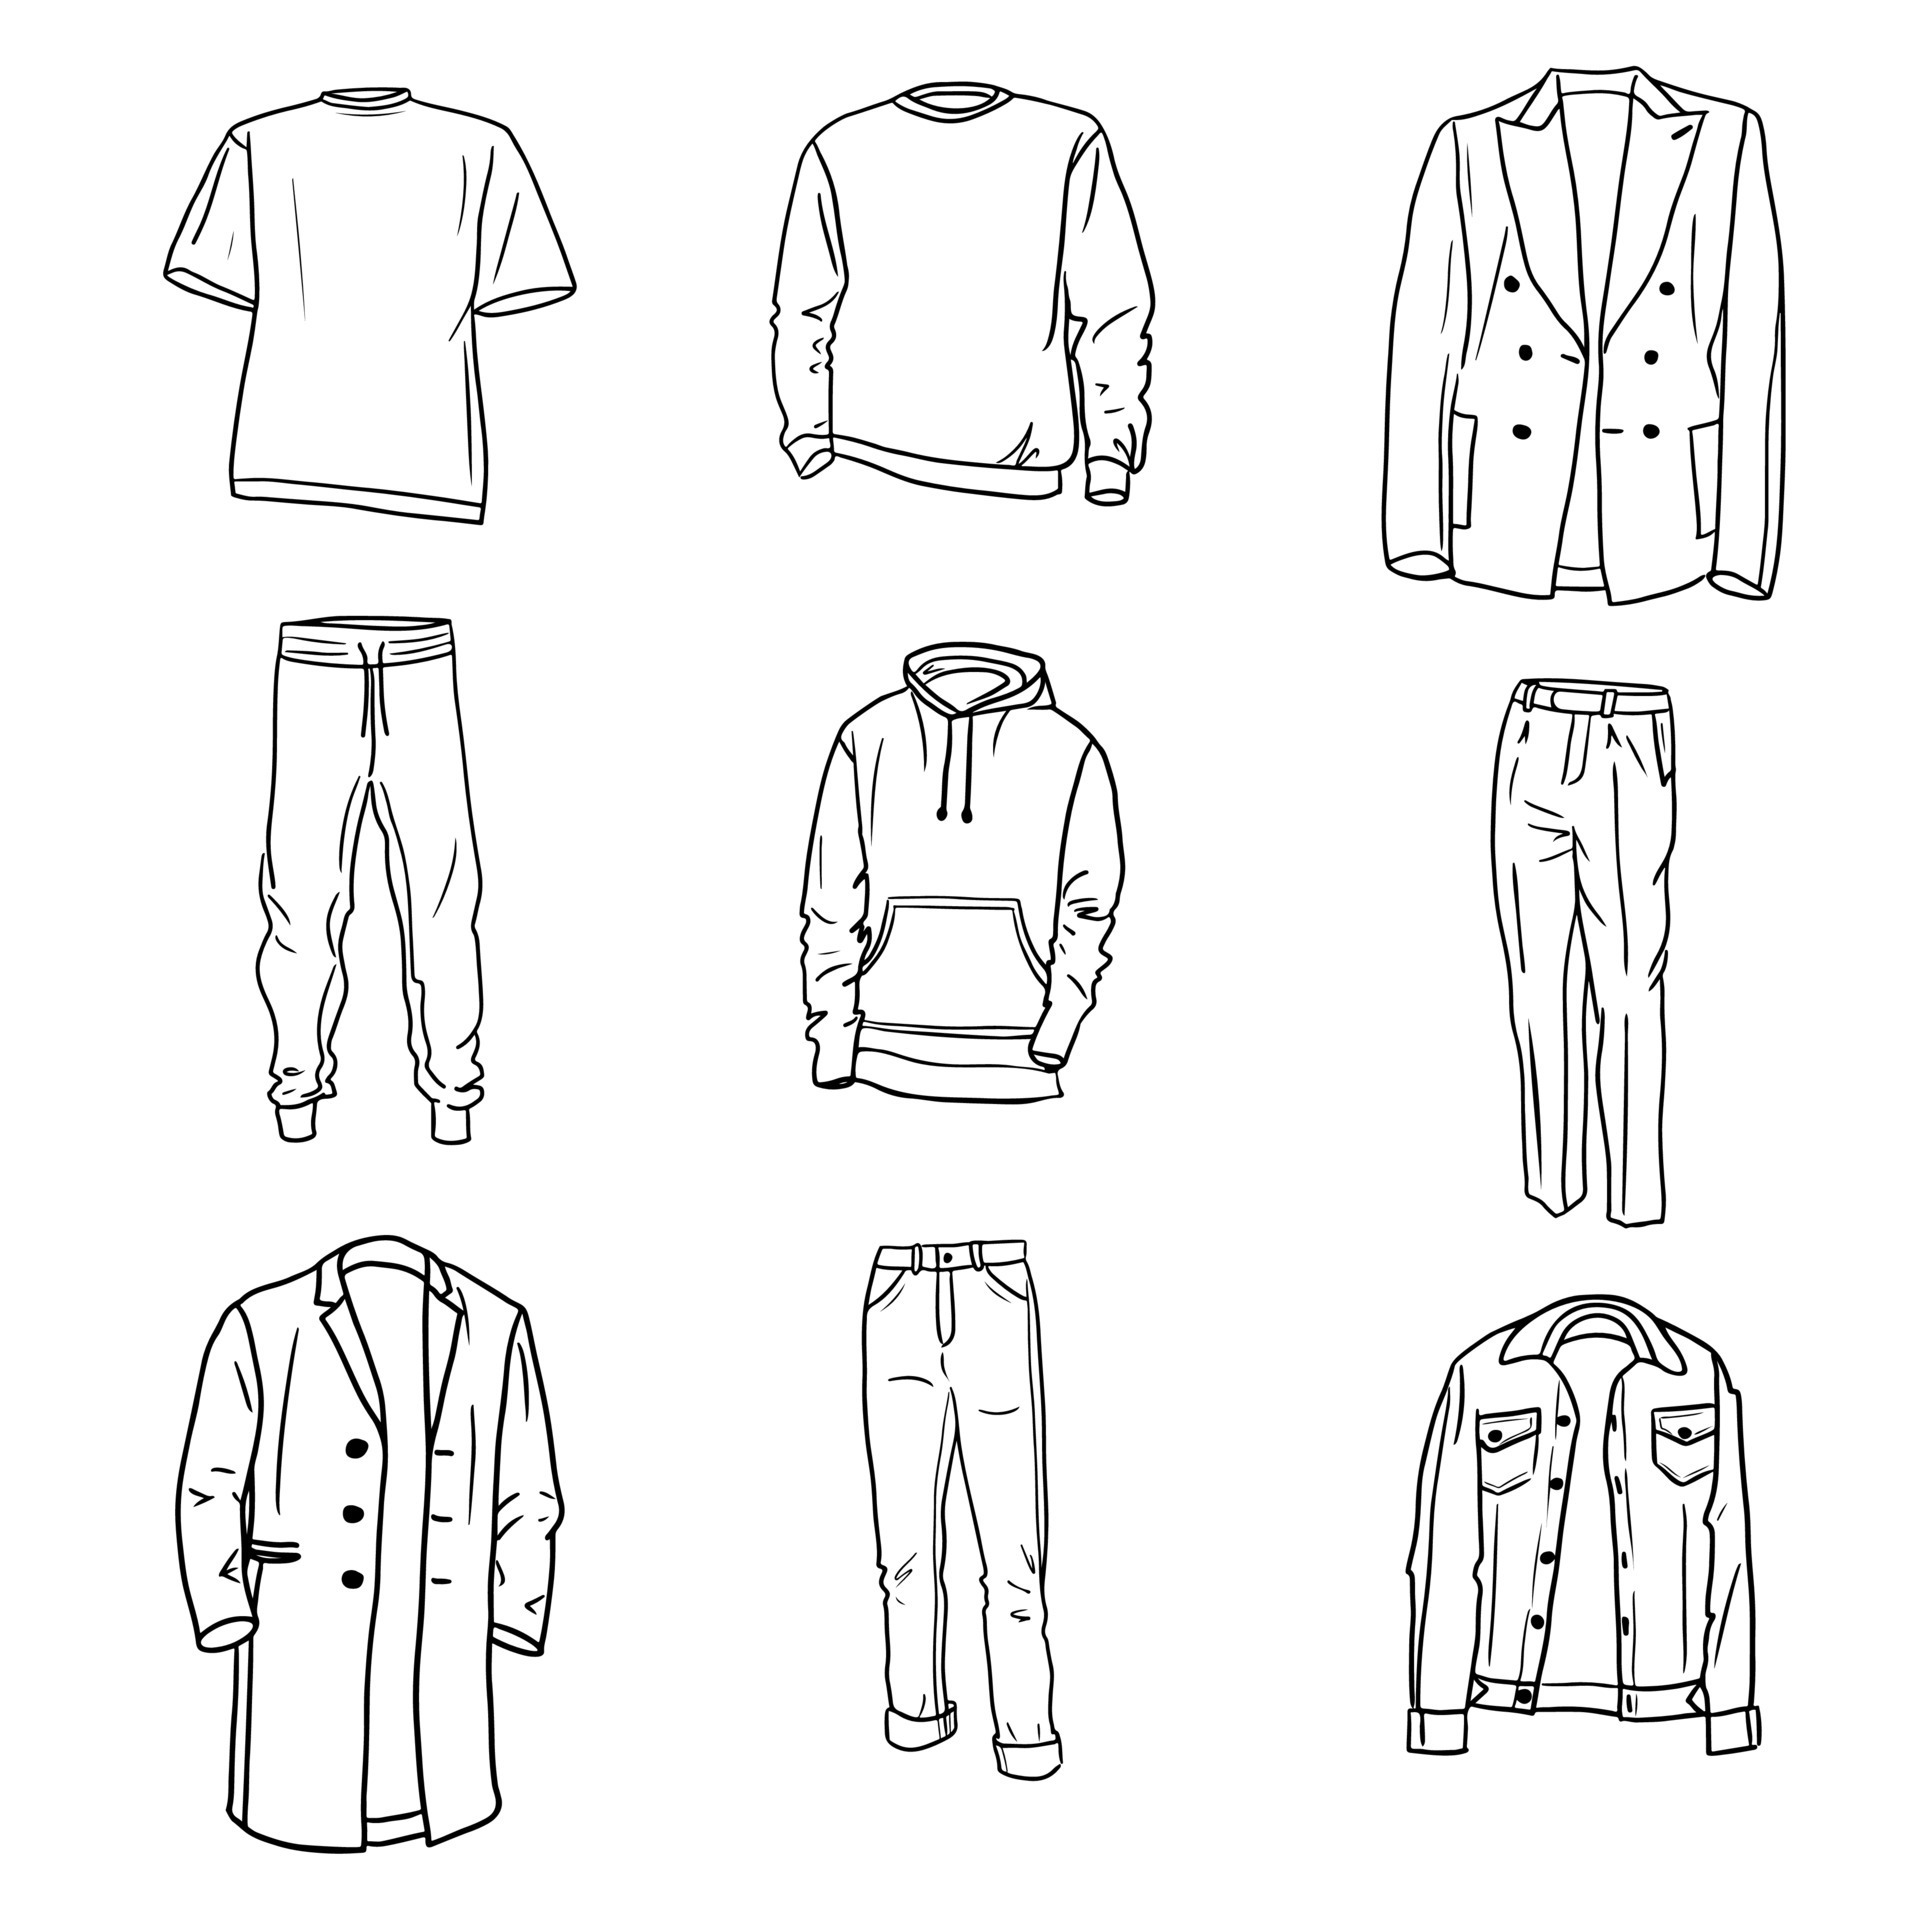 Big hand drawn set of men s everyday clothes sketches. Hoodie, jeans ...